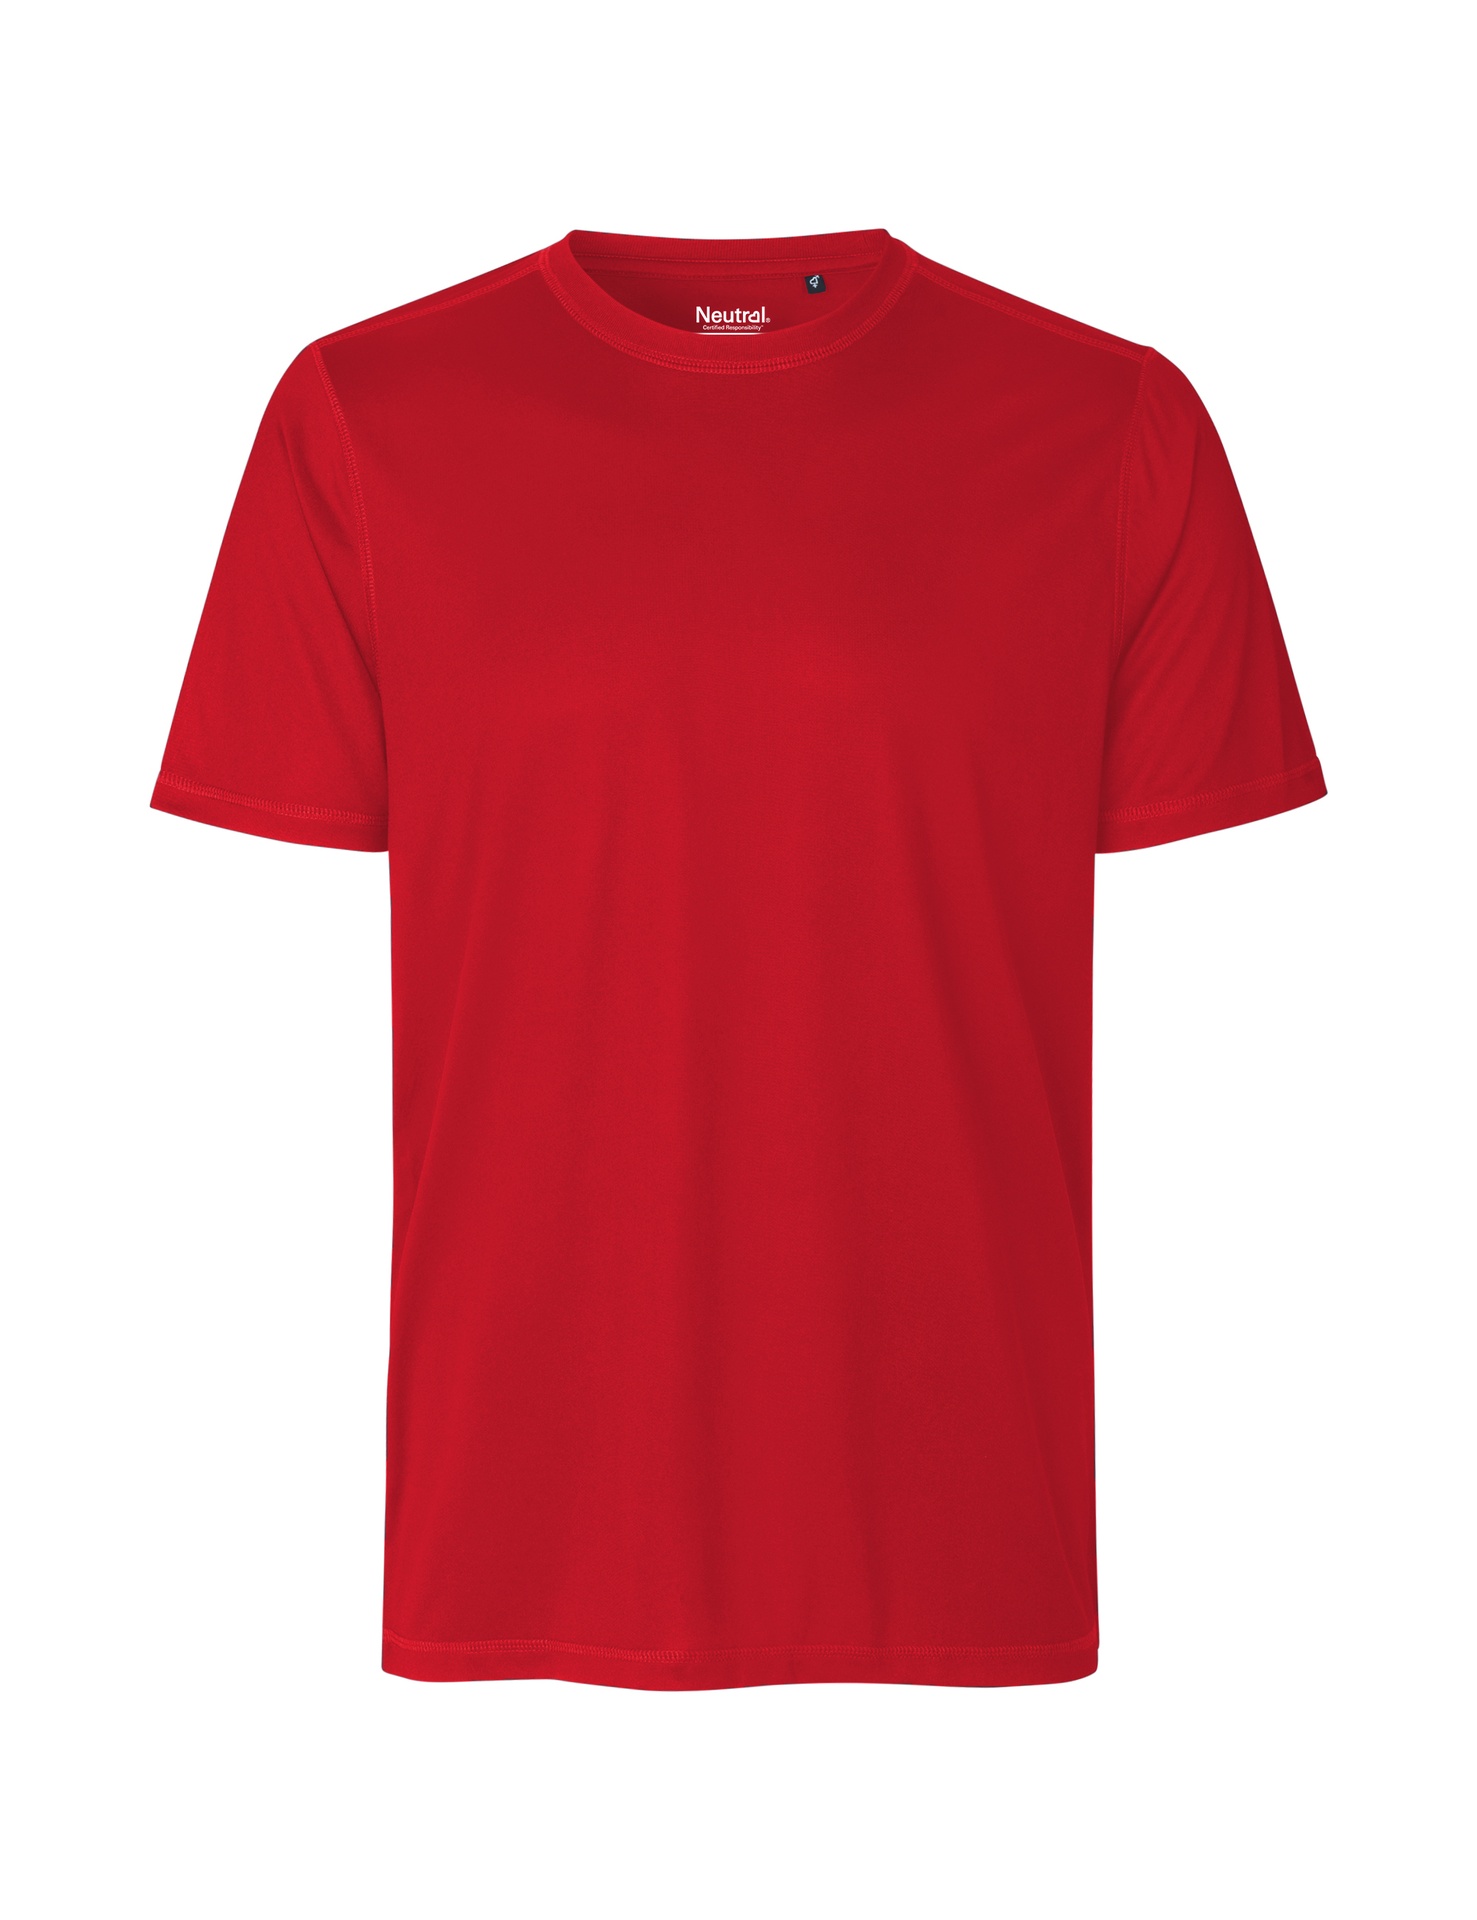 [PR/03768] Recycled Performance T-Shirt (Red 05, L)